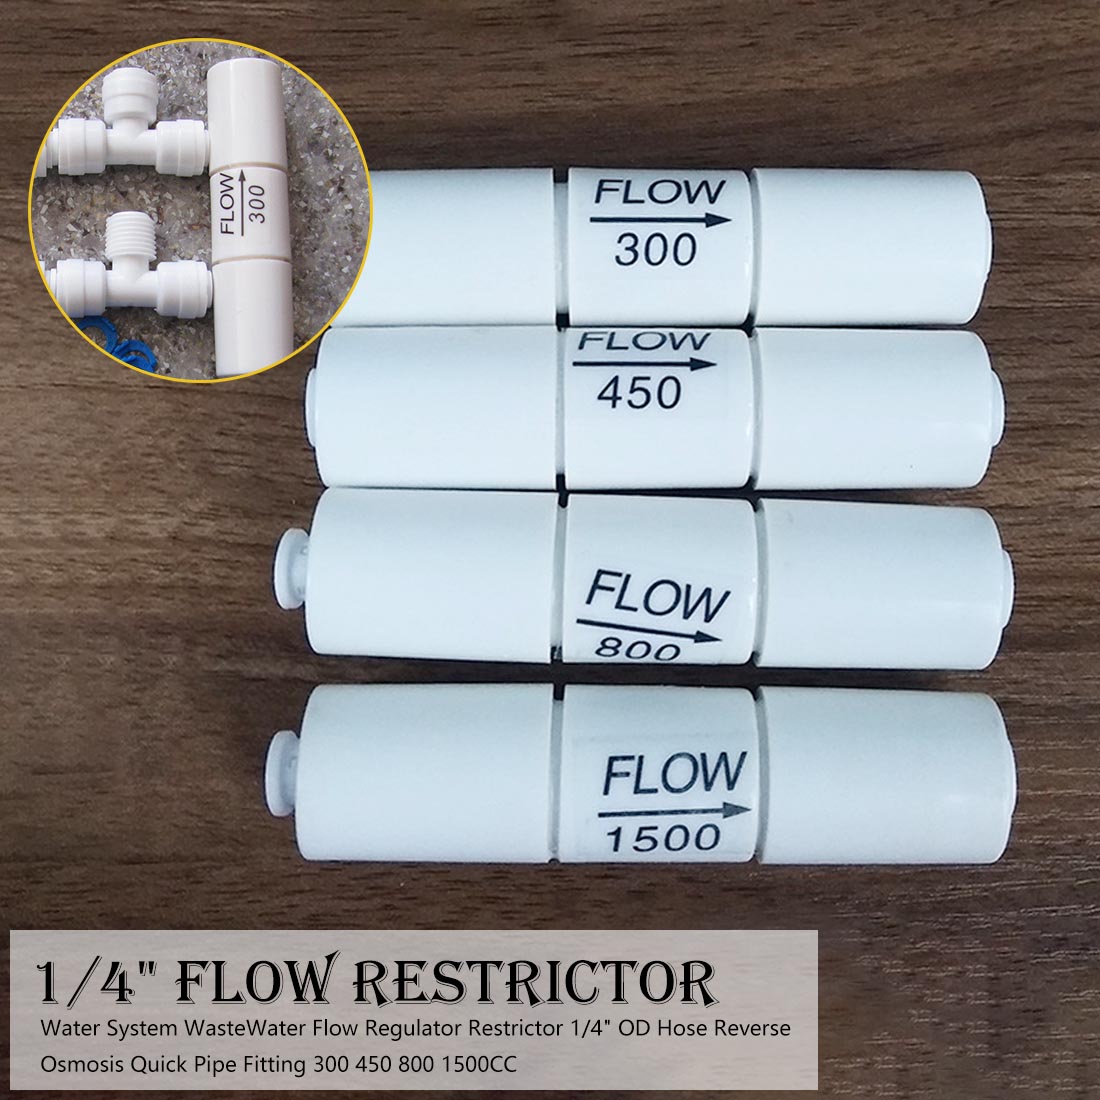 300 450 800 1500CC Water System WasteWater Flow Regulator Restrictor 1/4" OD Hose Reverse Osmosis Quick Pipe Fitting